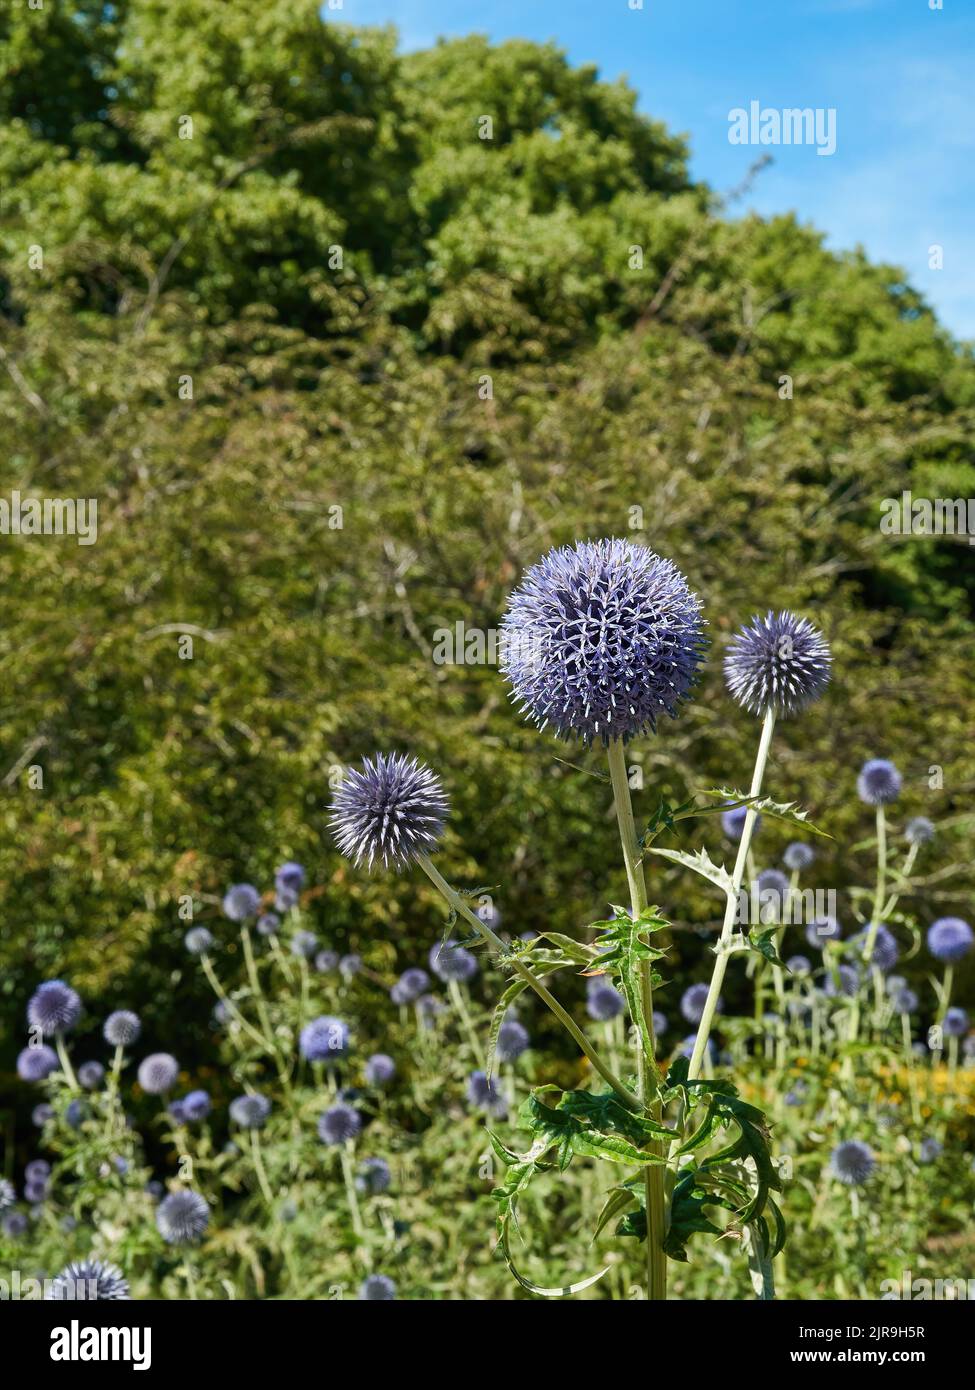 A constellation of purple globe thistles in bright sunlight, against a de-focused background of green trees and blue sky. Stock Photo